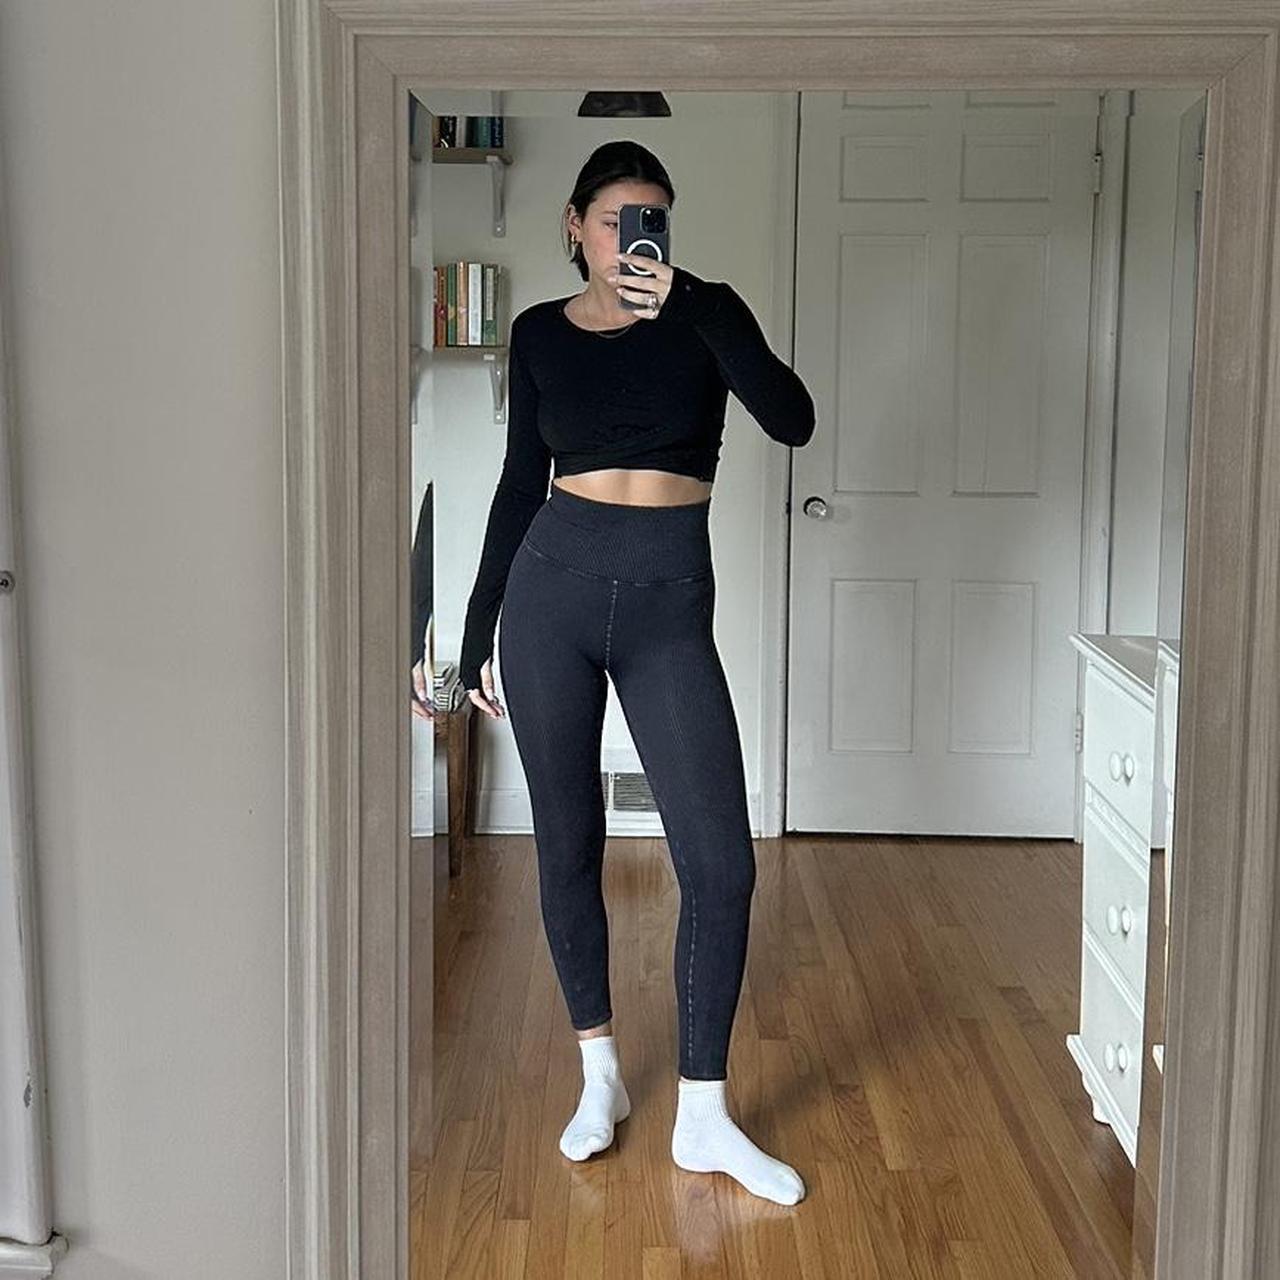 Small free people movement leggings with adorable - Depop